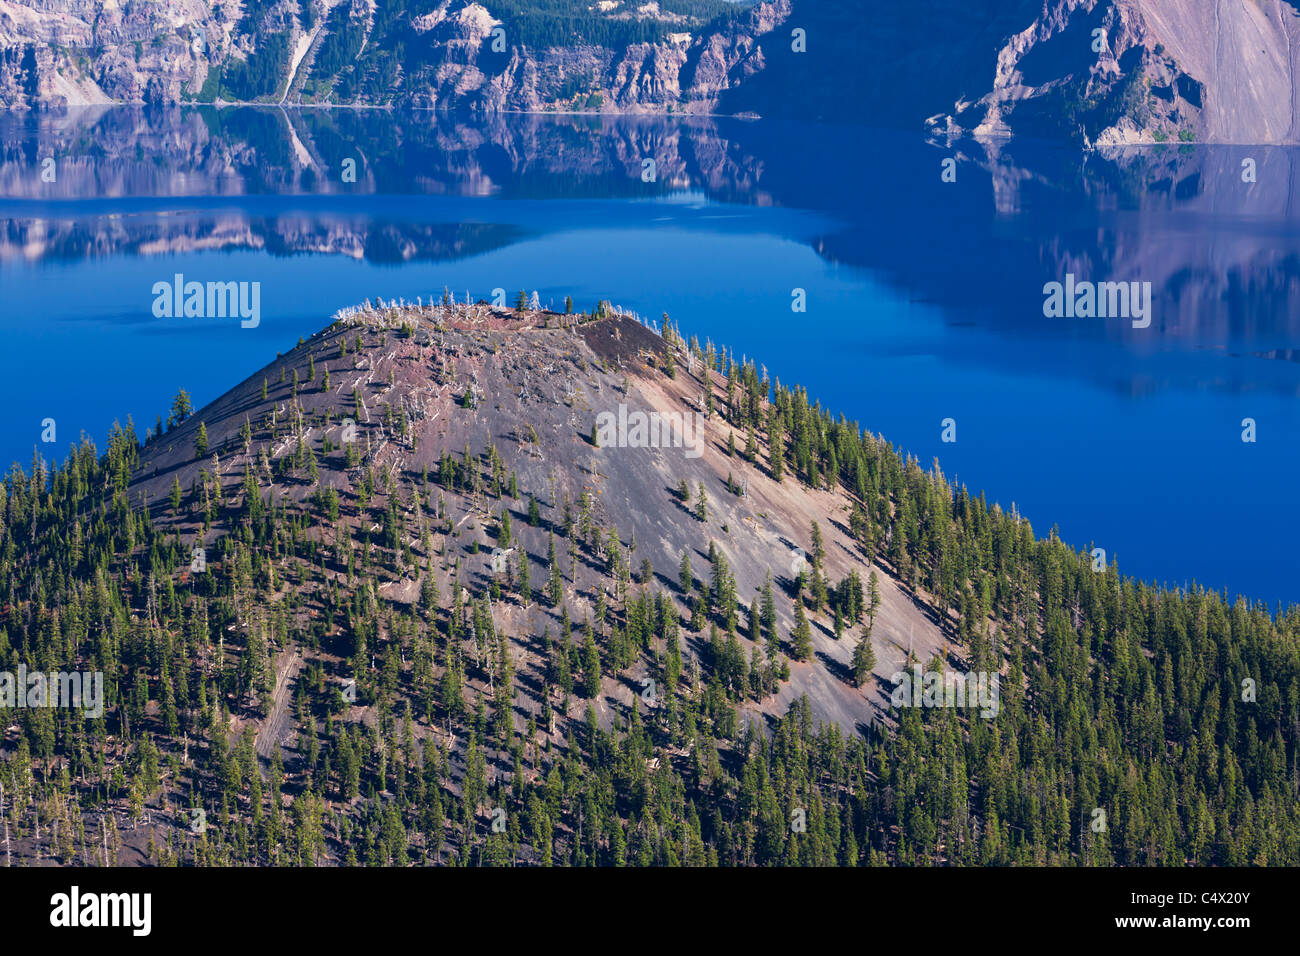 Wizard Island cinder cone in caldera of Crater Lake National Park US Oregon green trees on cone wall caldera rim reflection deep blue water background Stock Photo